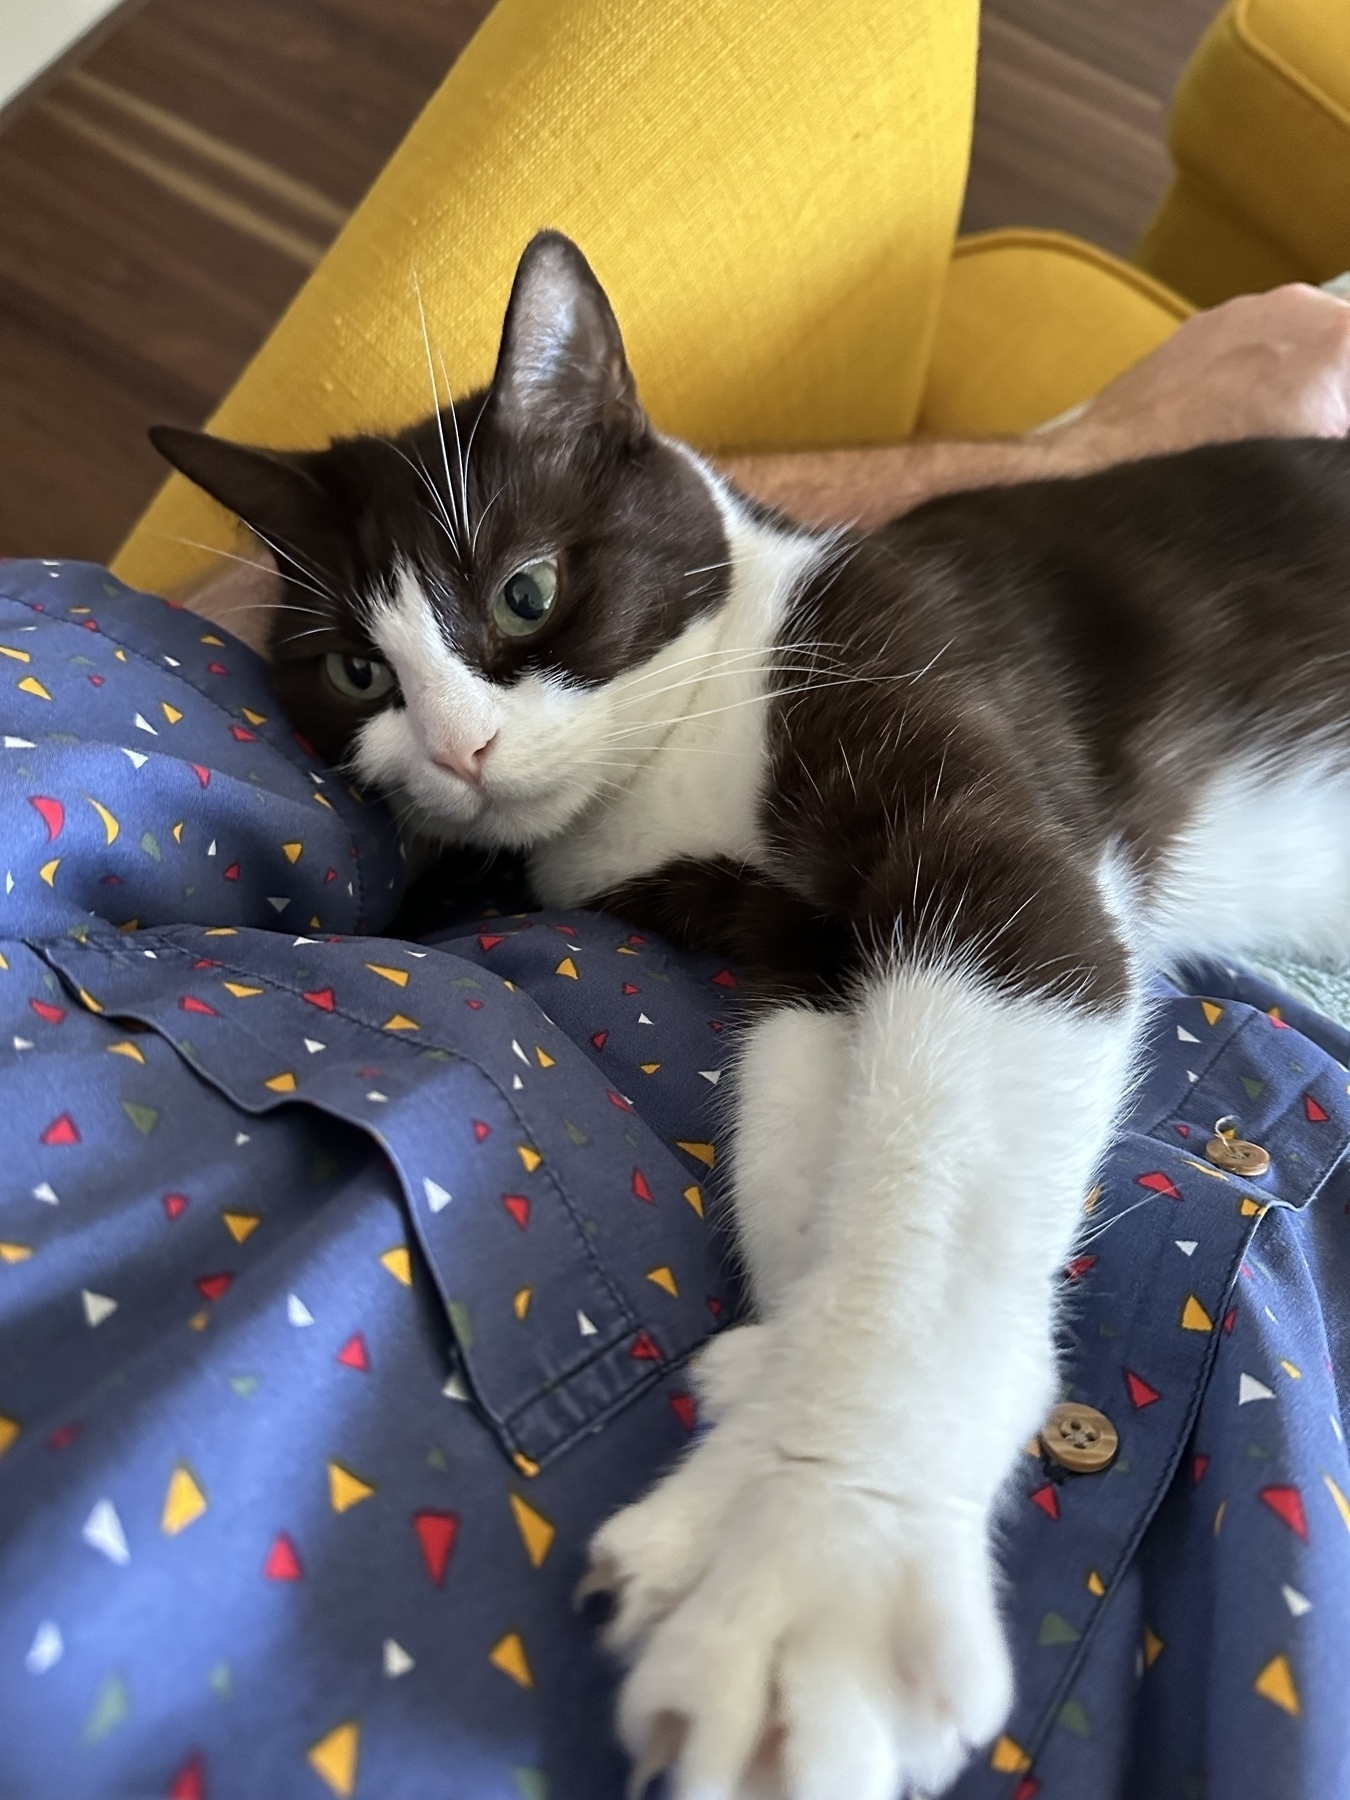 A black and white cat laying in a man’s lap with his left arm under her head. He is wearing a blue shirt with small coloured triangles on it. The arm of the mustard yellow chair is visible.